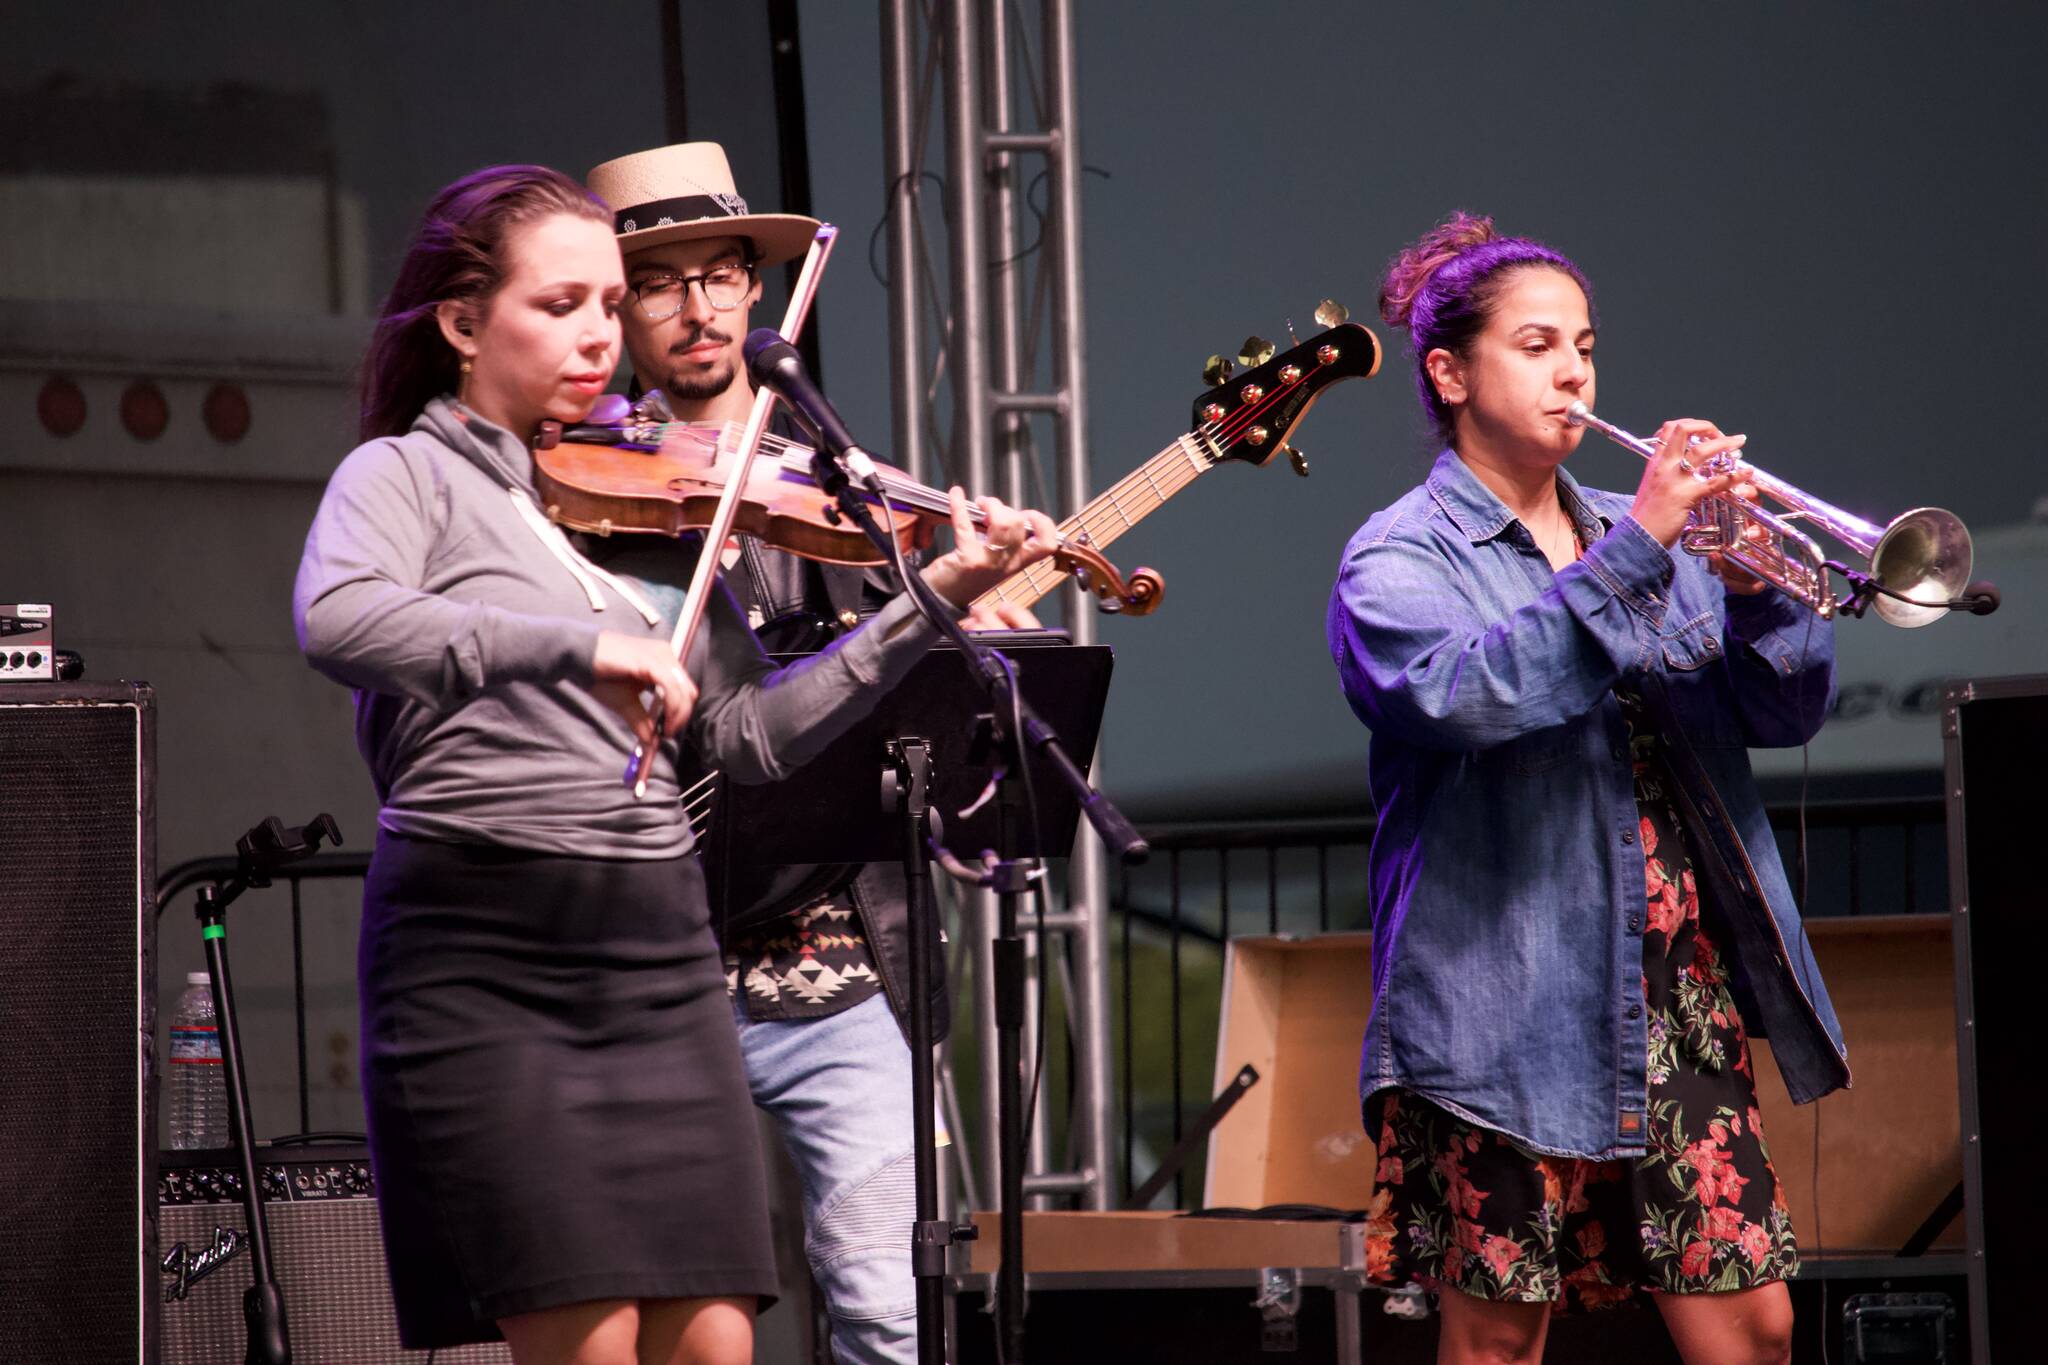 Locarno played Latin music at the Oak Harbor Music Festival on Friday. (Photo by Rachel Rosen/Whidbey News-Times)